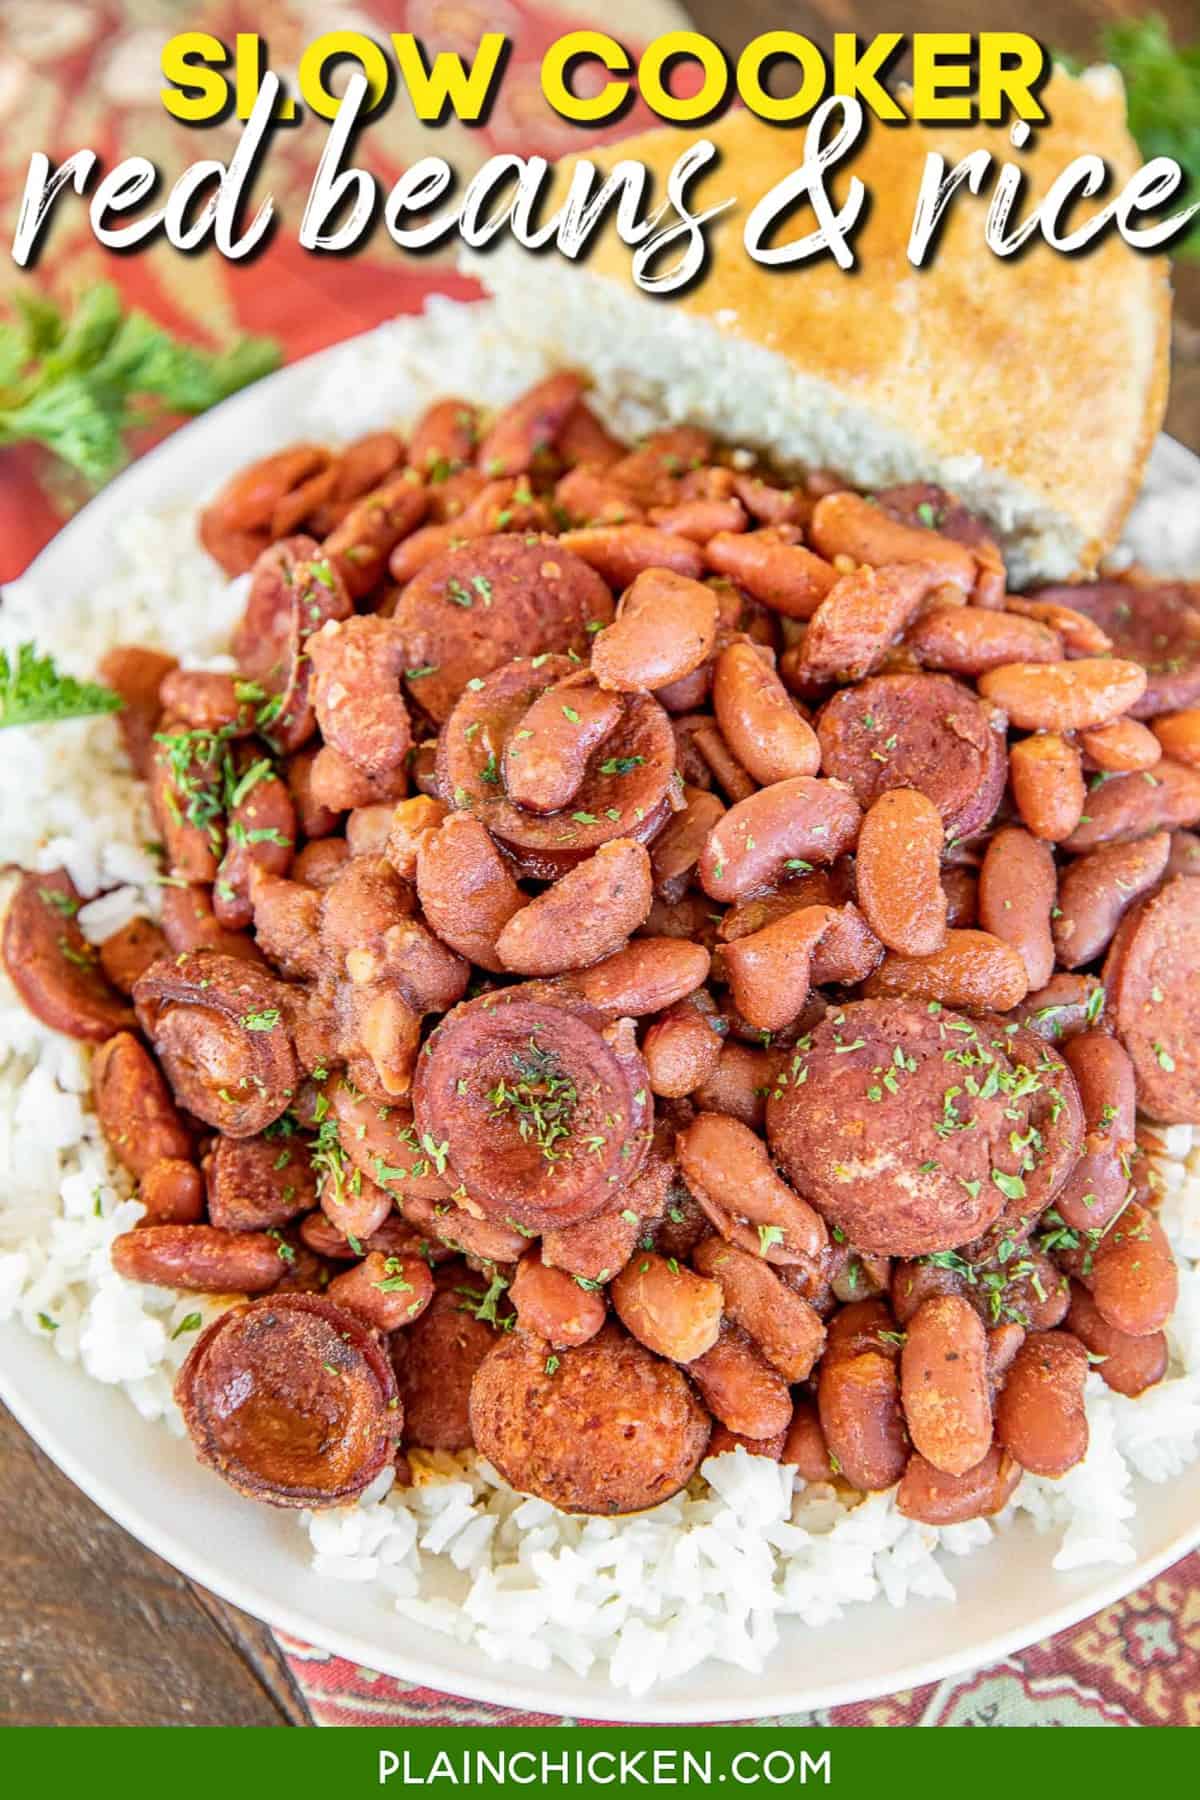 Popeye S Red Beans And Rice Recipe Slow Cooker Bryont Blog